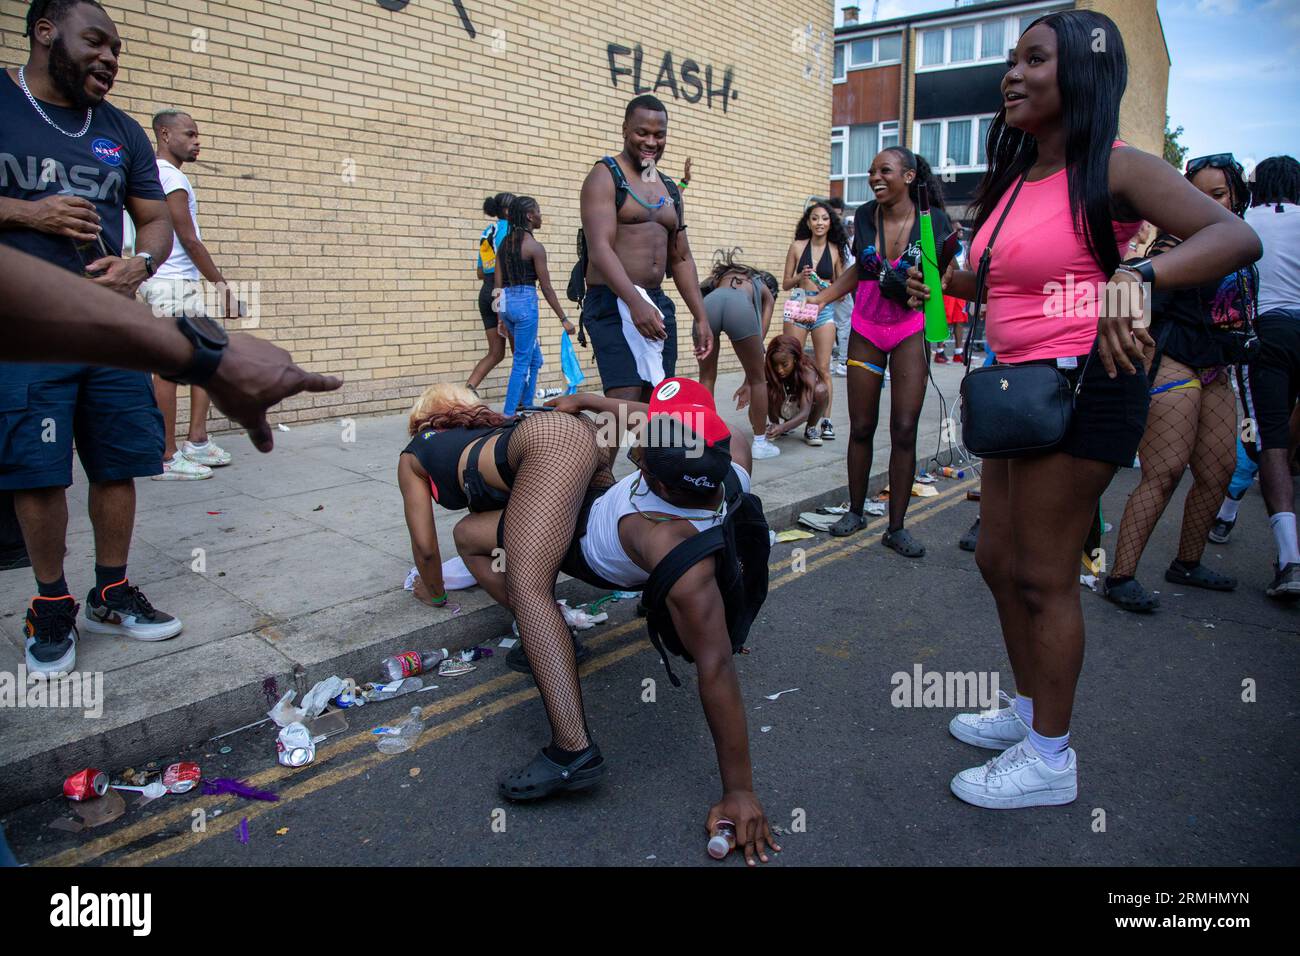 London, UK. 28 August 2023. Girls twerking at Notting Hill Carnival where millions have fcome to party at, Europe's largest street festival celebrating Caribbean culture. Credit: Kiki Streitberger / Alamy Live News Stock Photo